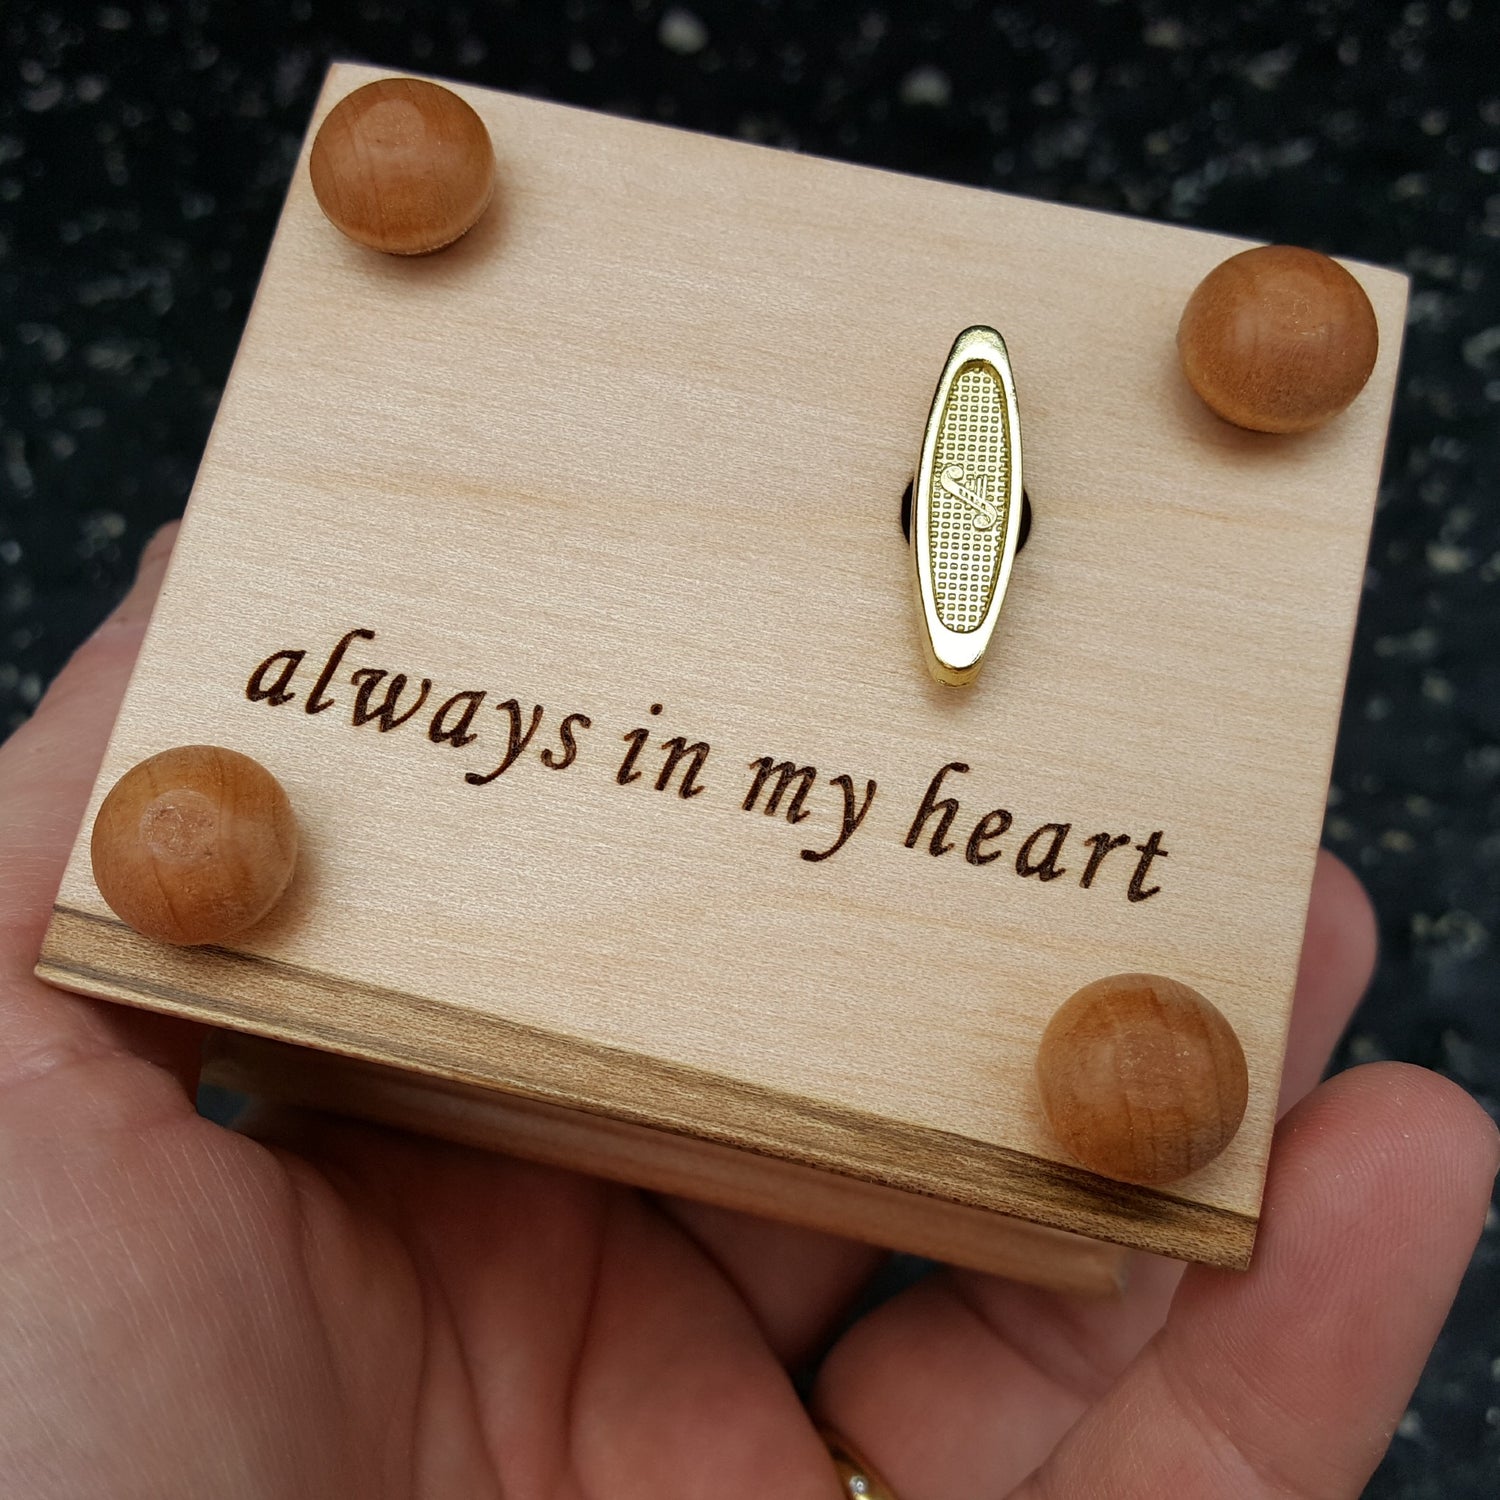 ALways in my heart, customized engraving